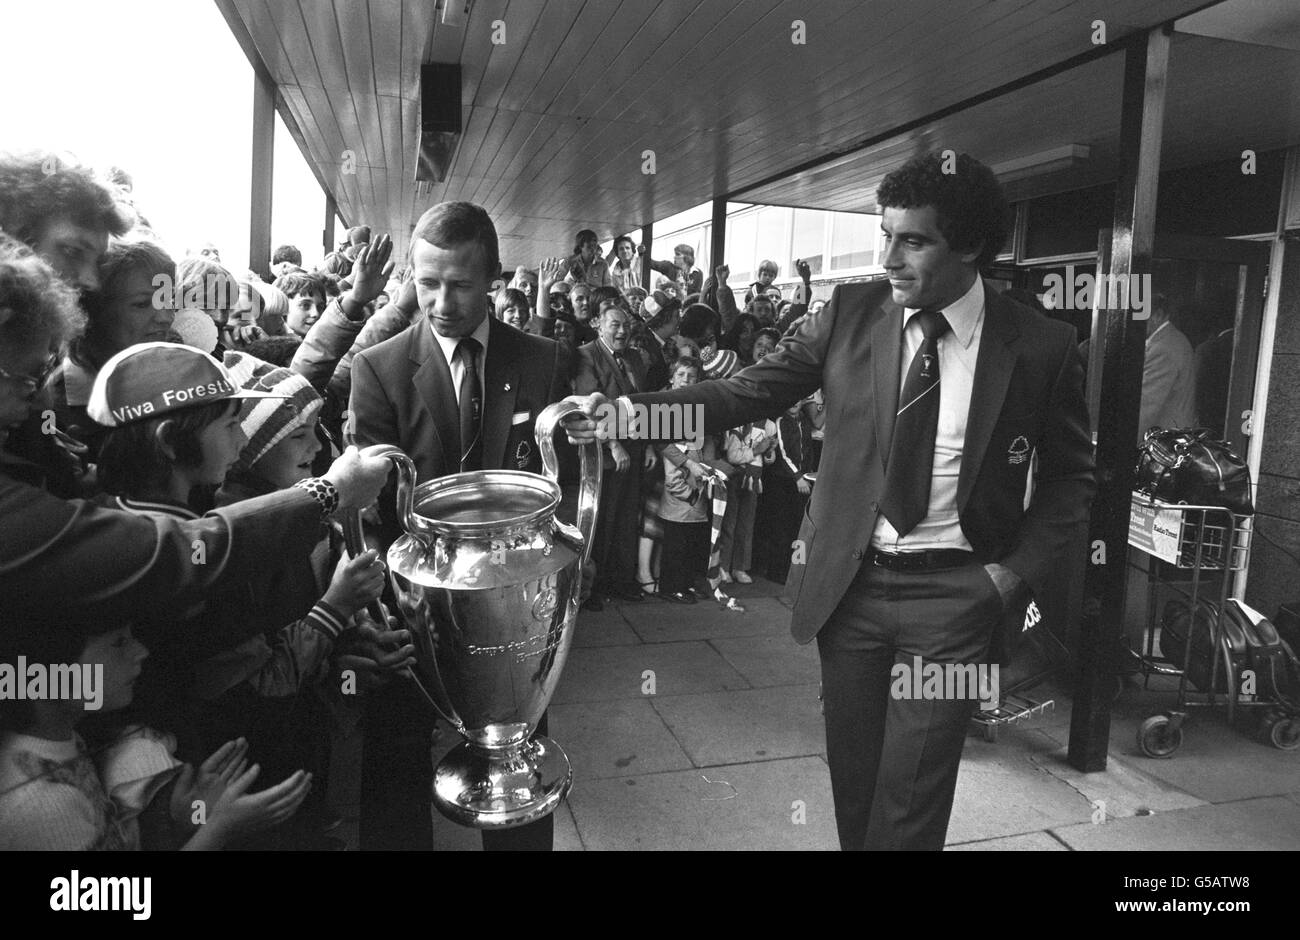 Soccer - Nottingham Forest European Cup - East Midlands Airport Stock Photo